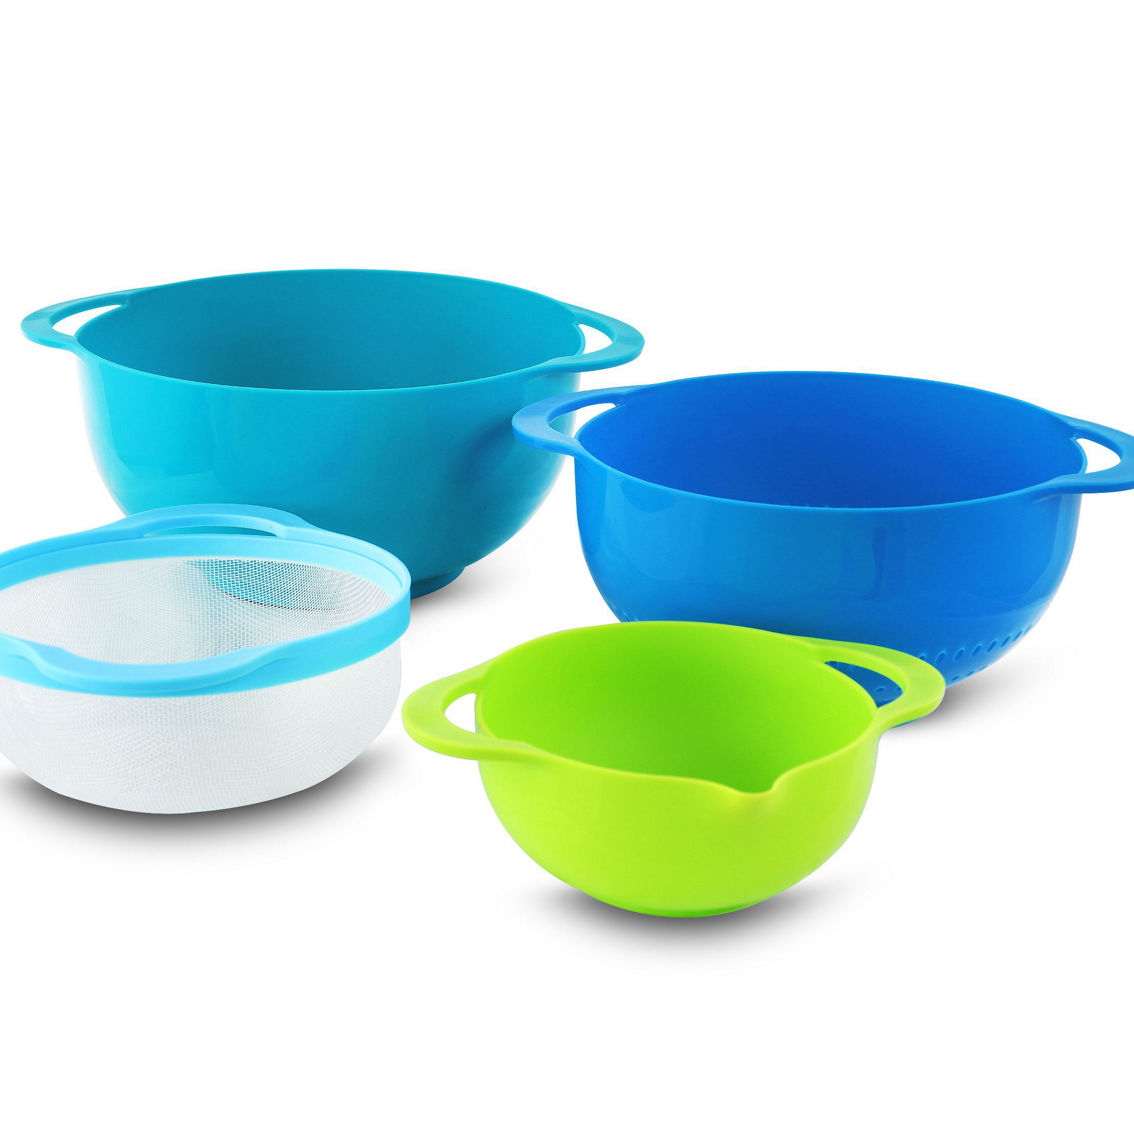 MegaChef Multipurpose Stackable Mixing Bowl and Measuring Cup Set - Image 3 of 5